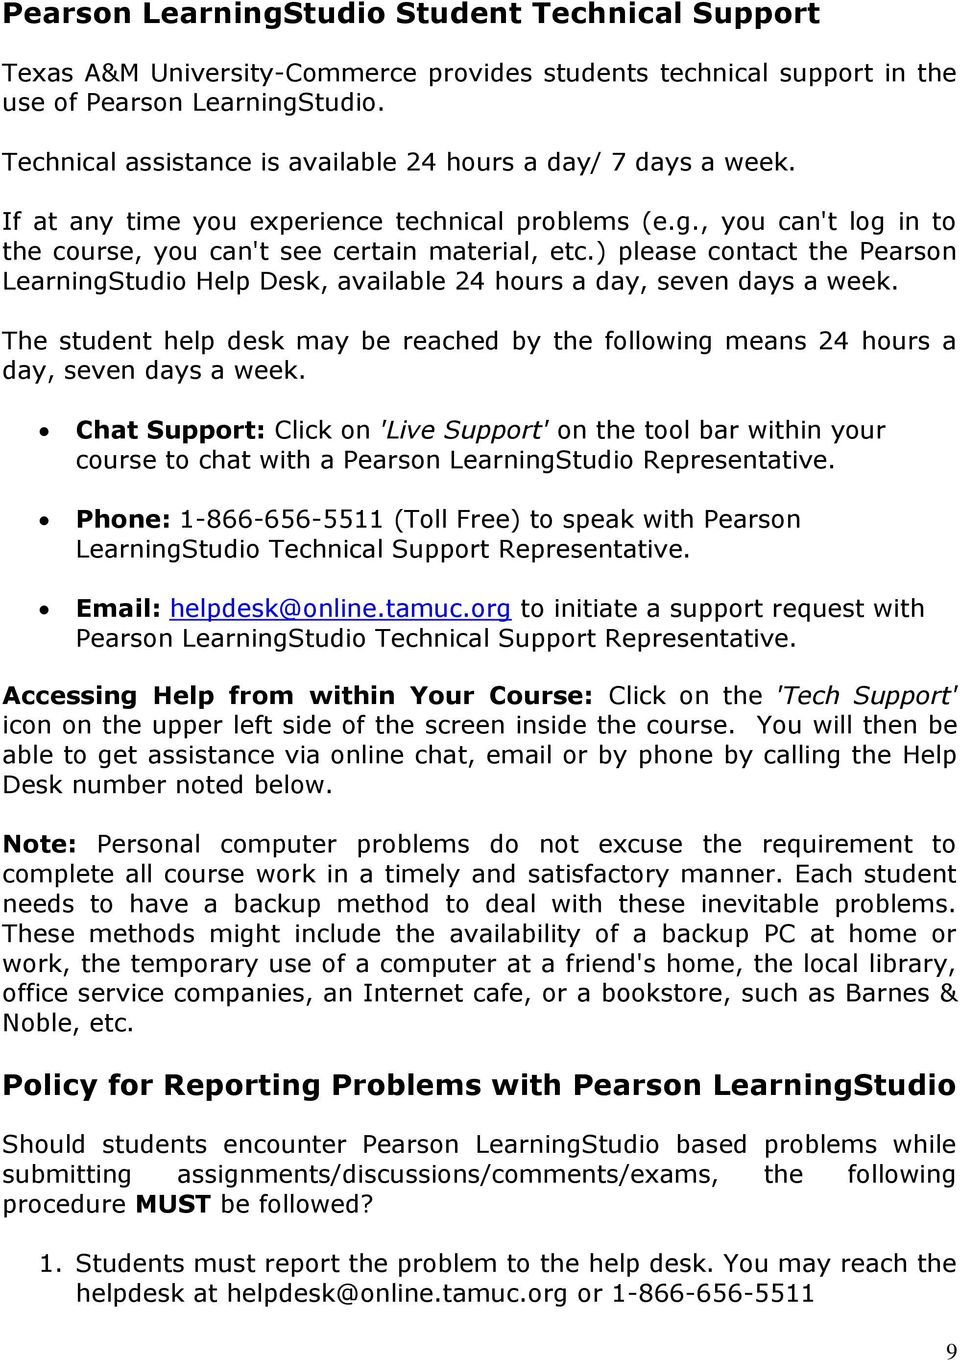 ) please contact the Pearson LearningStudio Help Desk, available 24 hours a day, seven days a week. The student help desk may be reached by the following means 24 hours a day, seven days a week.